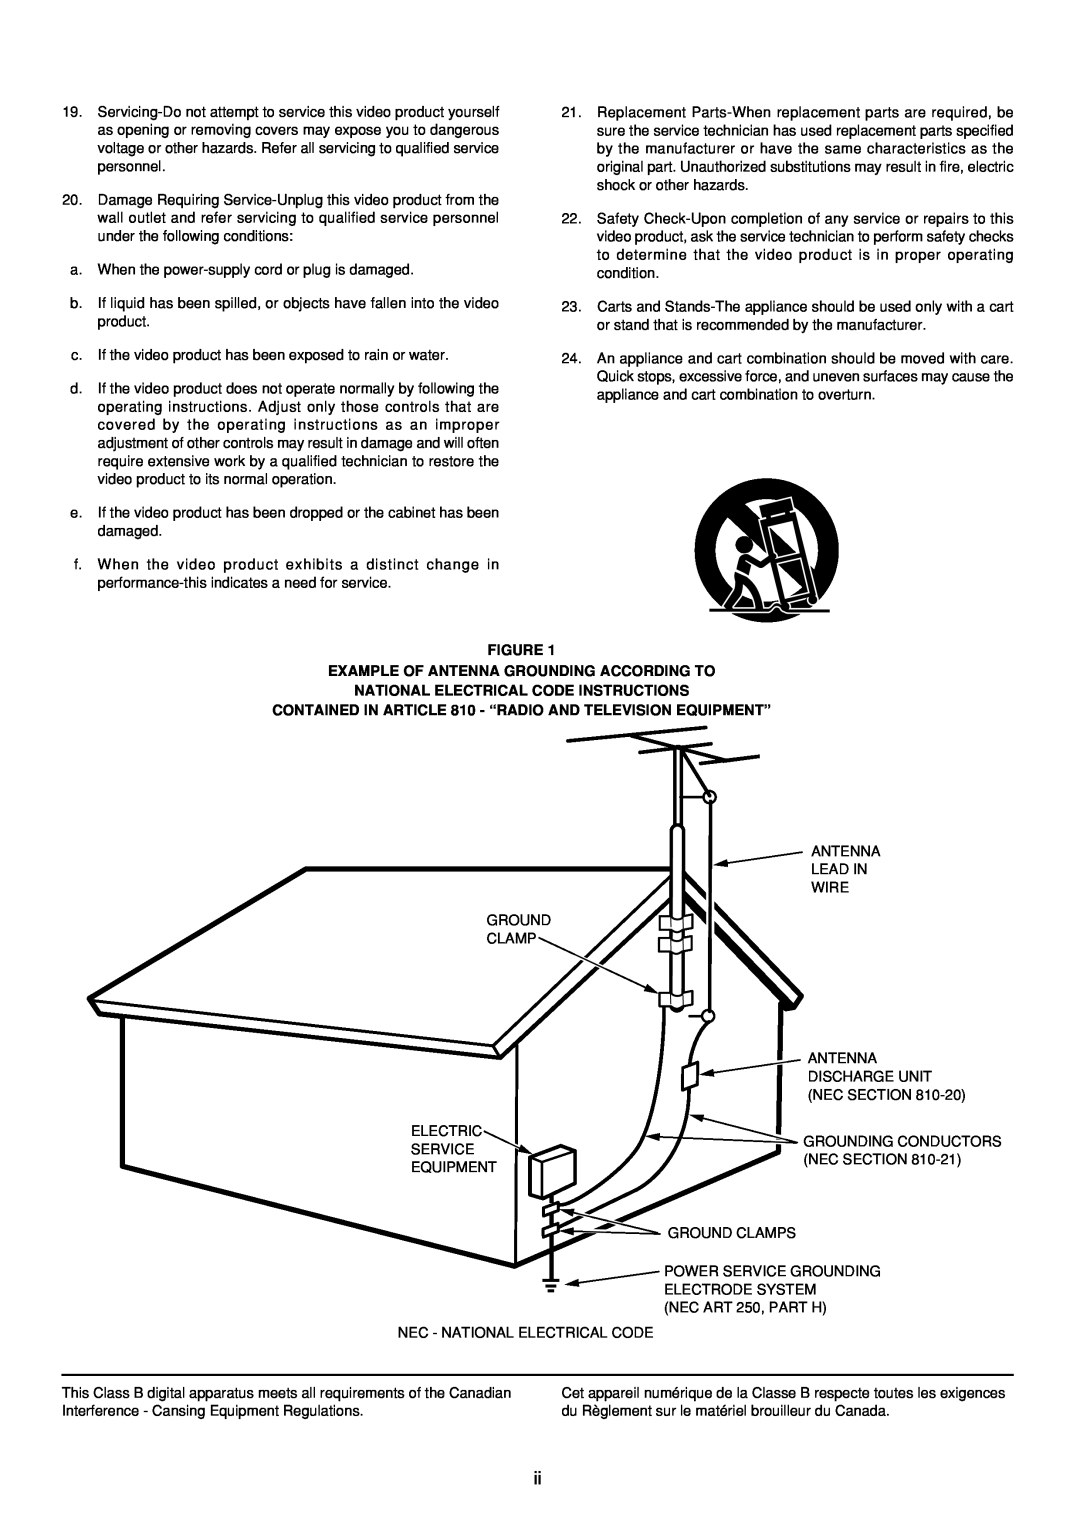 Marantz SR4200 manual Figure Example Of Antenna Grounding According To, National Electrical Code Instructions 